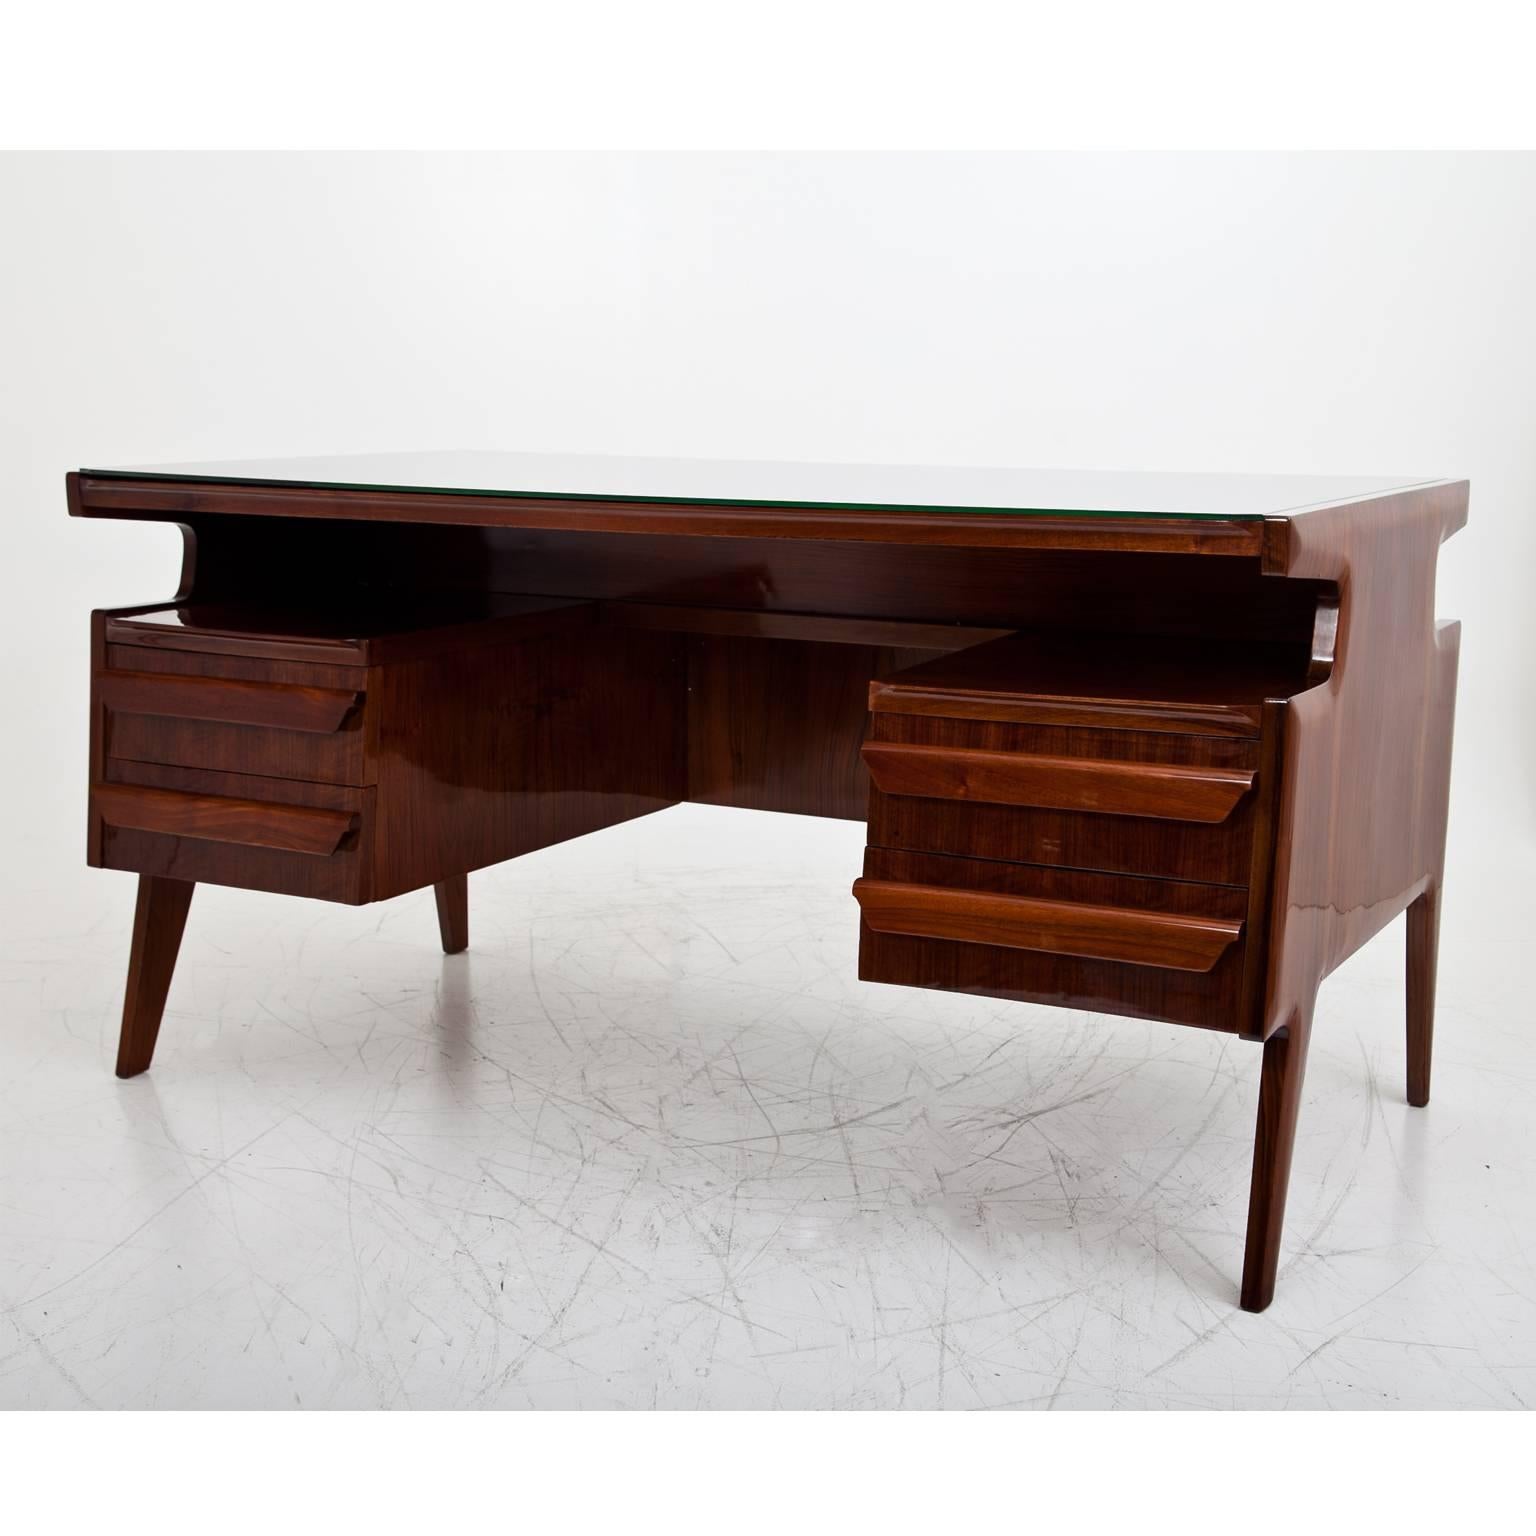 Elegant executive desk on slightly angled legs. The writing surface is covered with a green-tinted glass pane. Underneath is a shelving area and four drawers. The table shows a beautiful veneer pattern and is designed for an all-round view. The